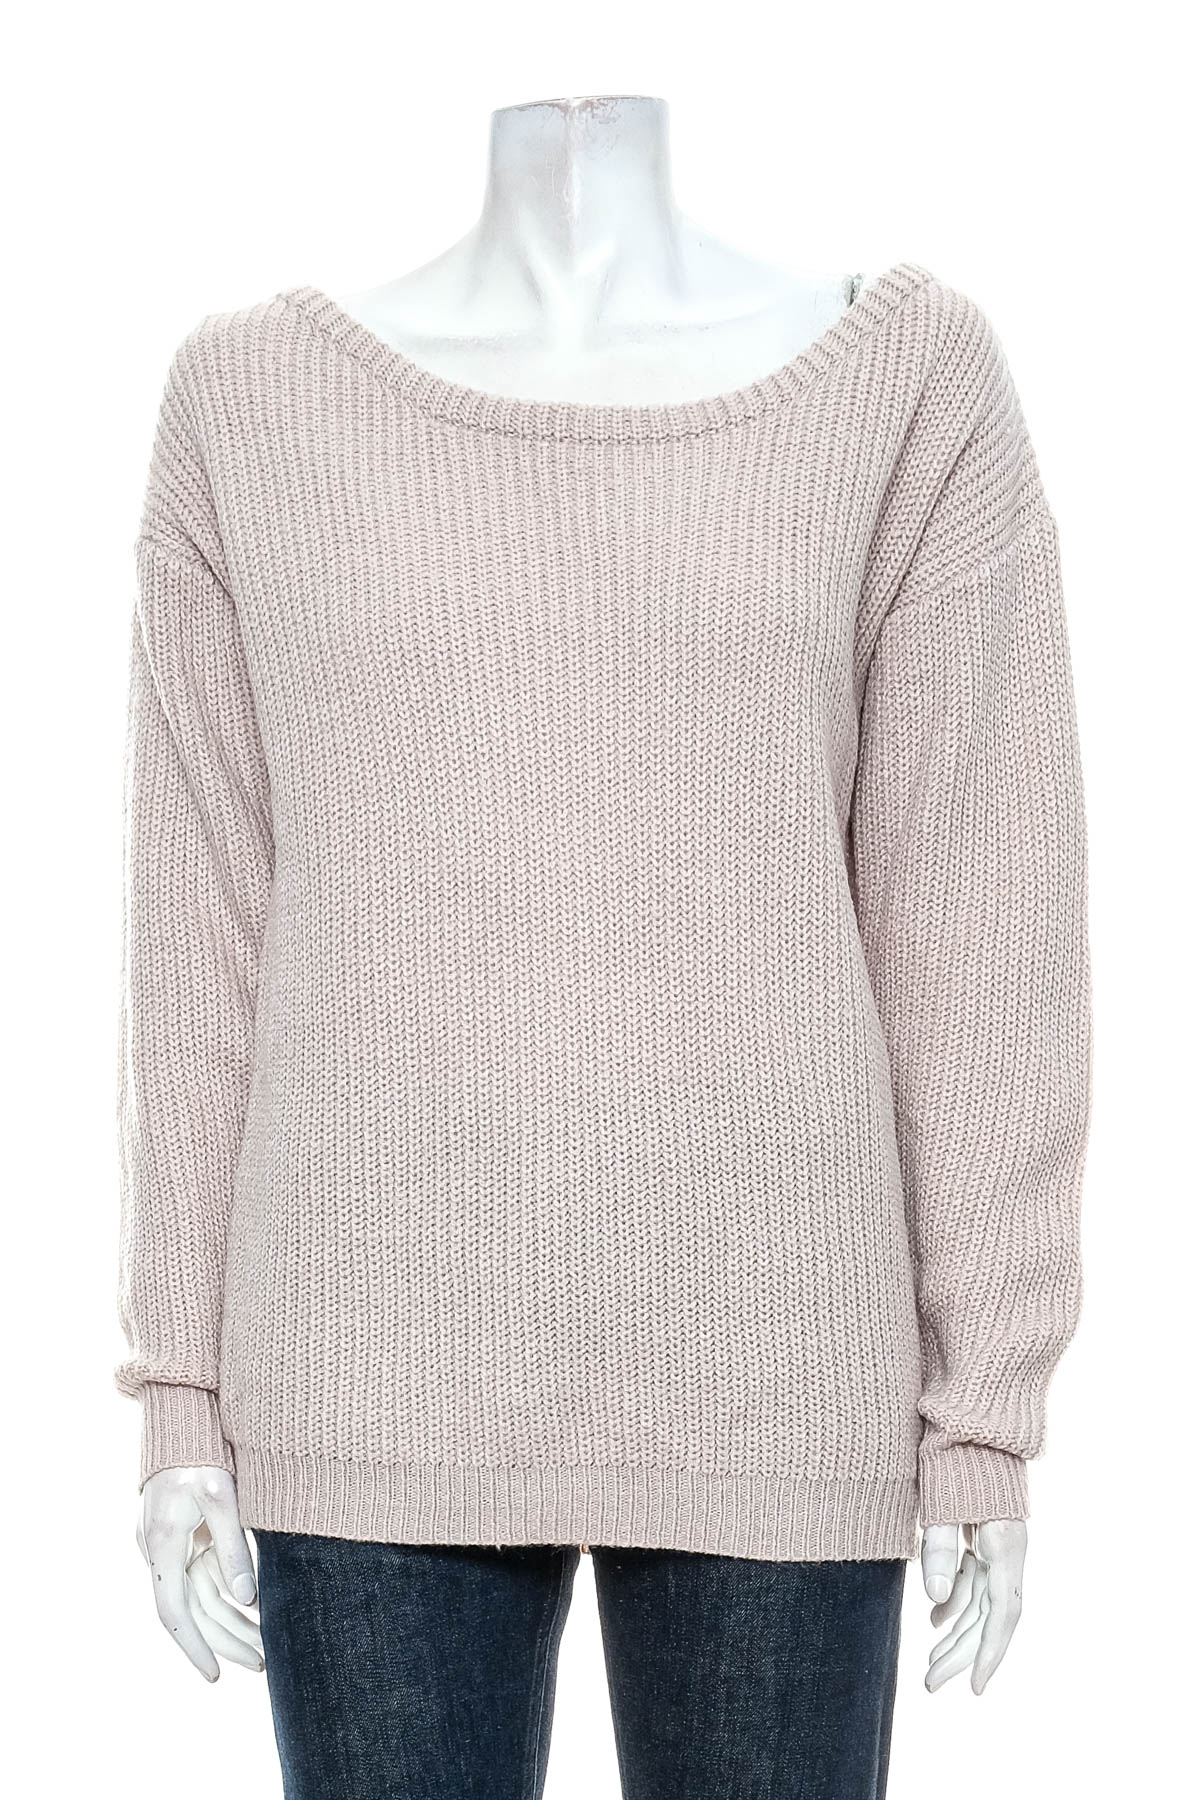 Women's sweater - MISSGUIDED - 0